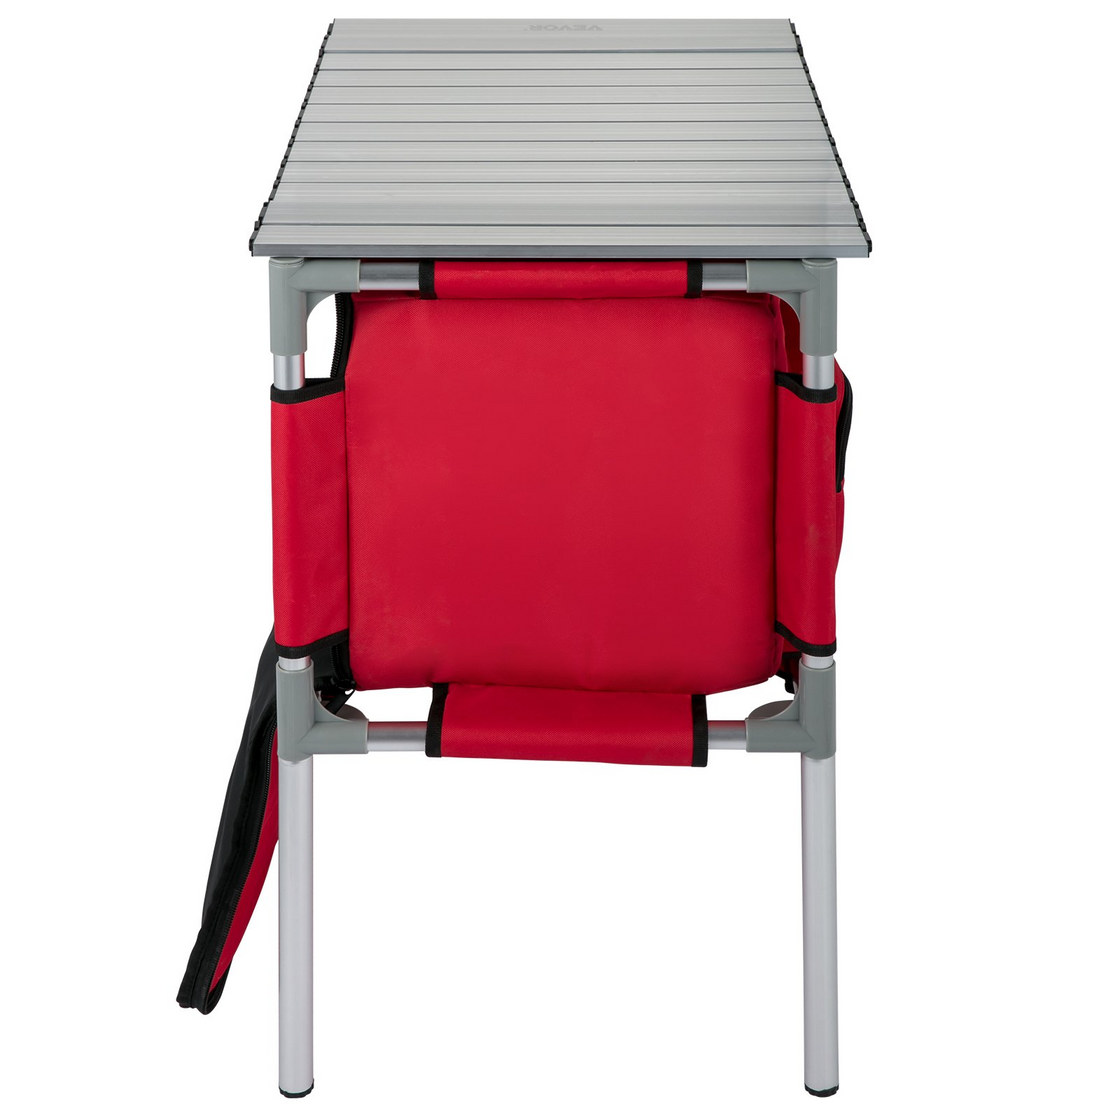 VEVOR Camping Kitchen Table, Aluminum Portable Folding Station with 4 Storage, 4 Detachable Legs and Carry Bag, Quick Installation for Outdoor Picnic Beach Party Cooking, Red